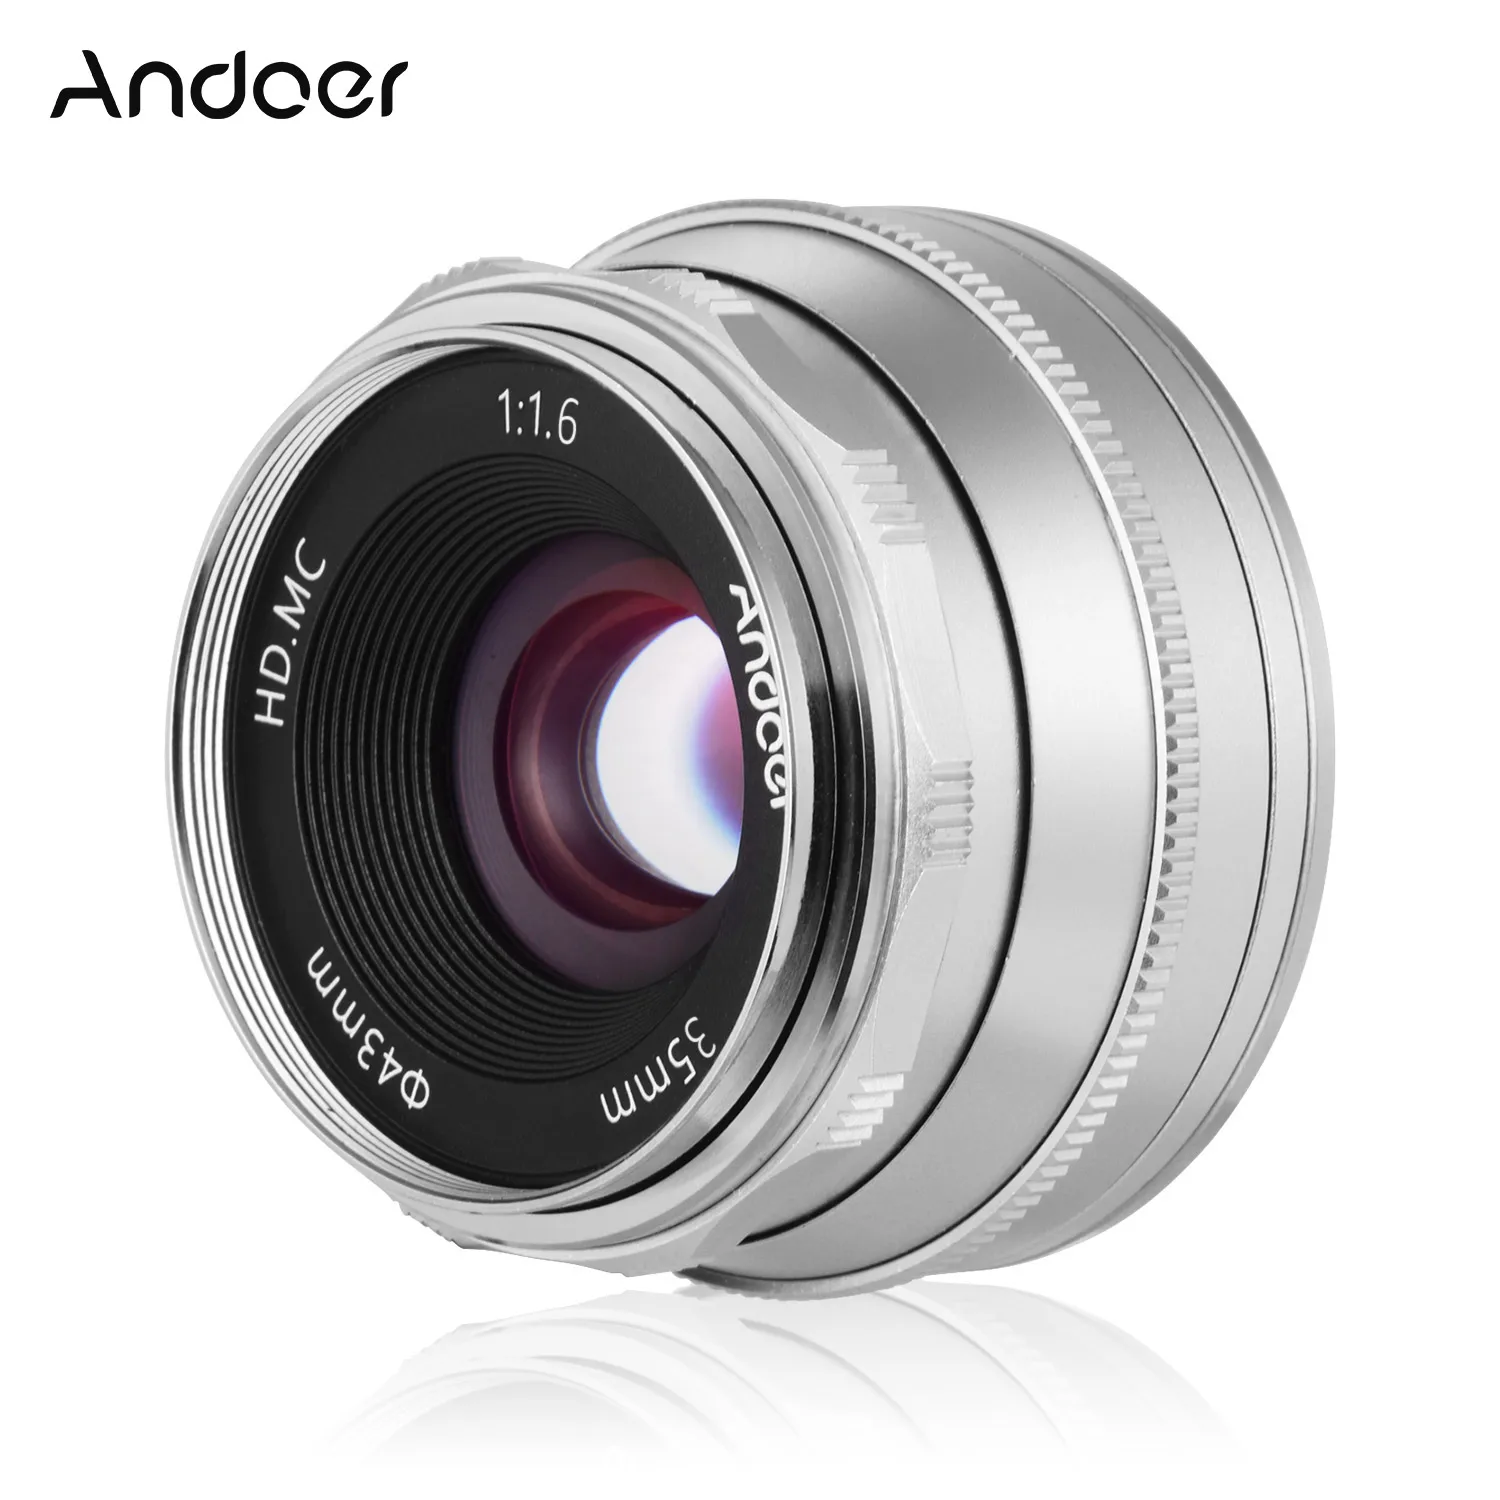 

Andoer 35mm Lens F1.6 Manual Focus Lens Large Aperture Compatible with Fujifilm Fuji X-A1/X-A10/X-A2 FX-Mount Mirrorless Cameras